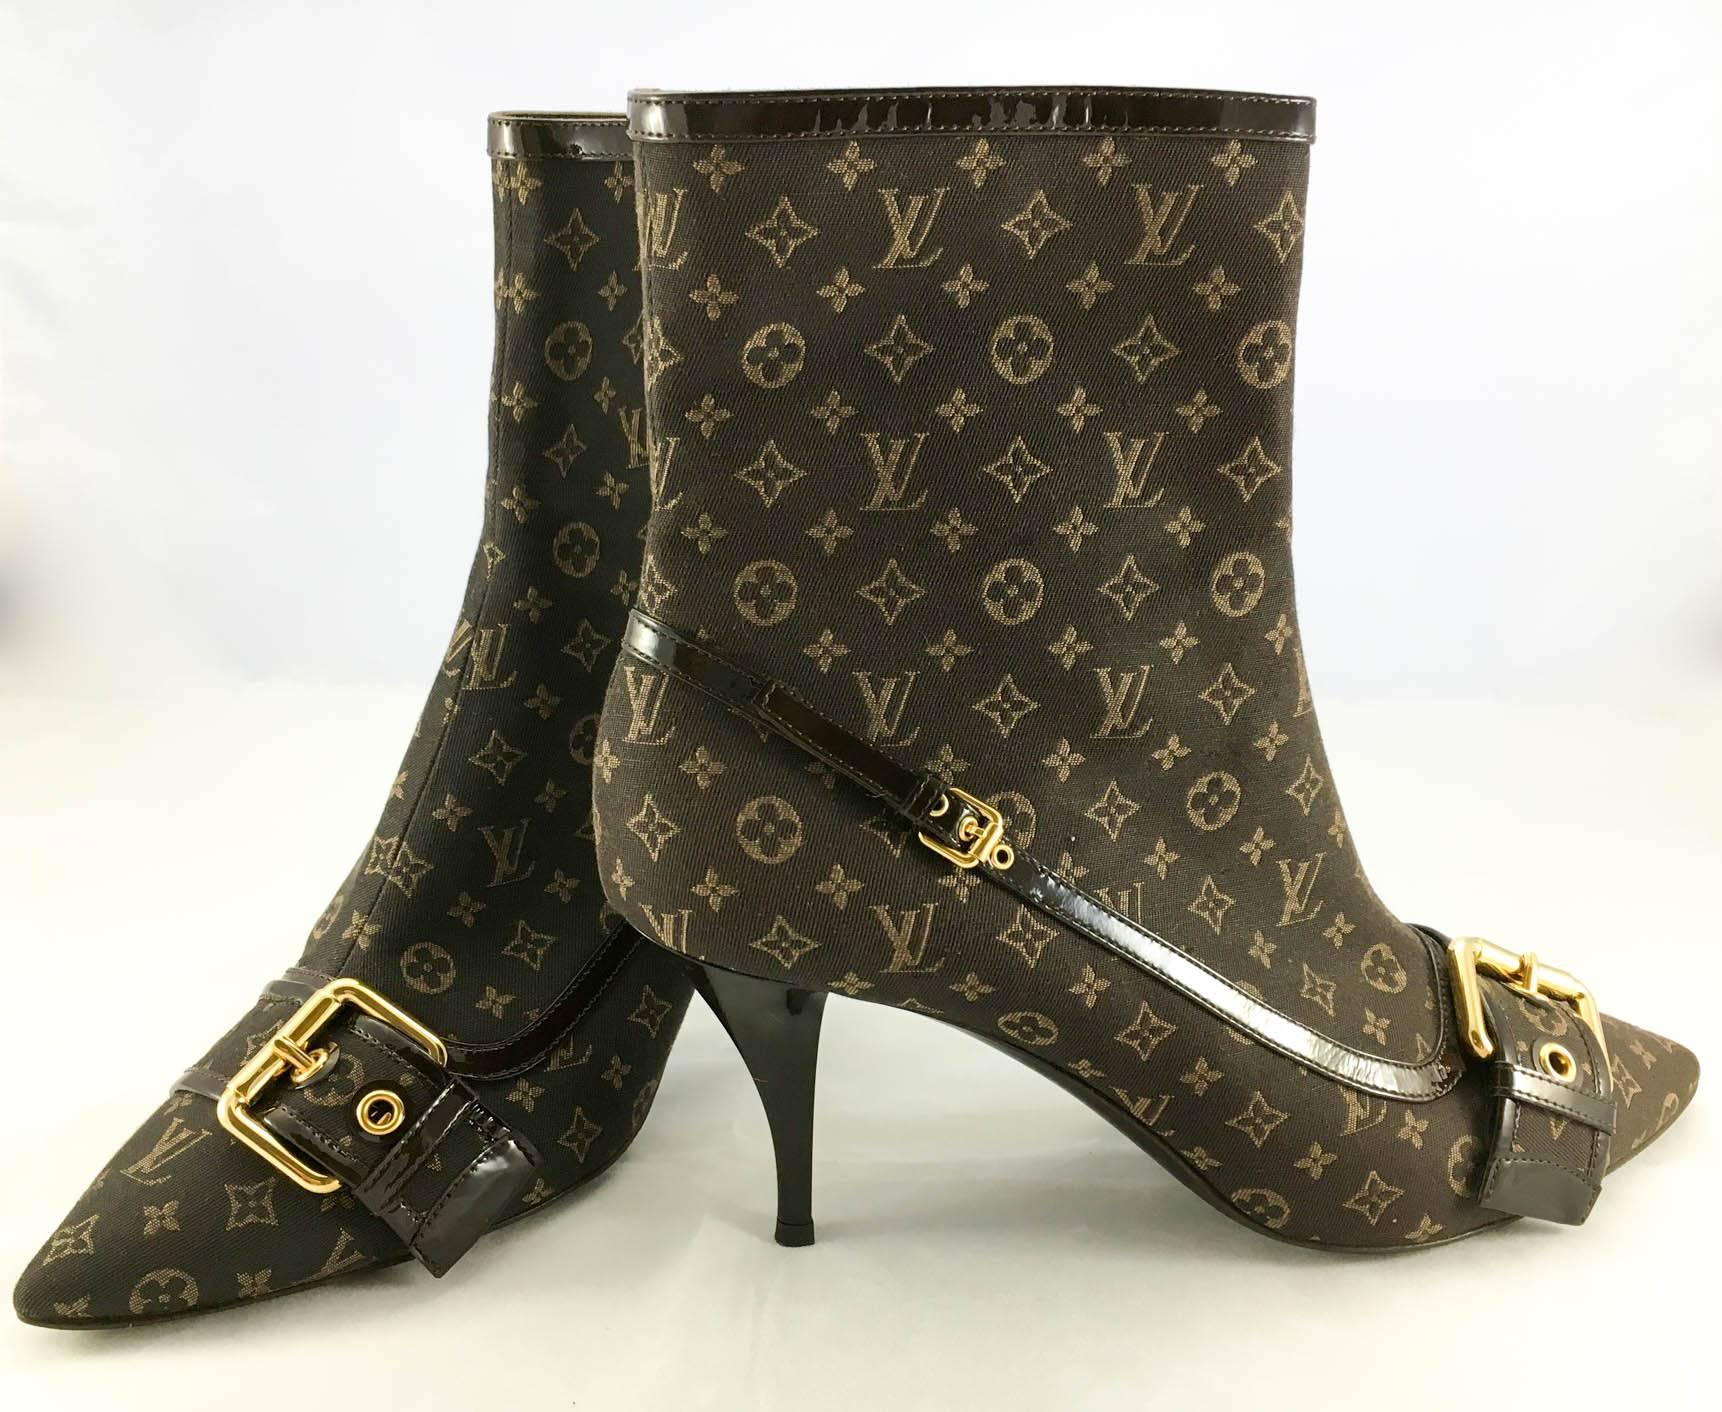 Fabulous Louis Vuitton Mimosa Monogram Mini Ankle Boots. These gorgeous 3-inch heel boots by Louis Vuitton are at once luxurious and bold. They boast the shape of a pump with the volume of boots. They are made in brown canvas featuring the iconic